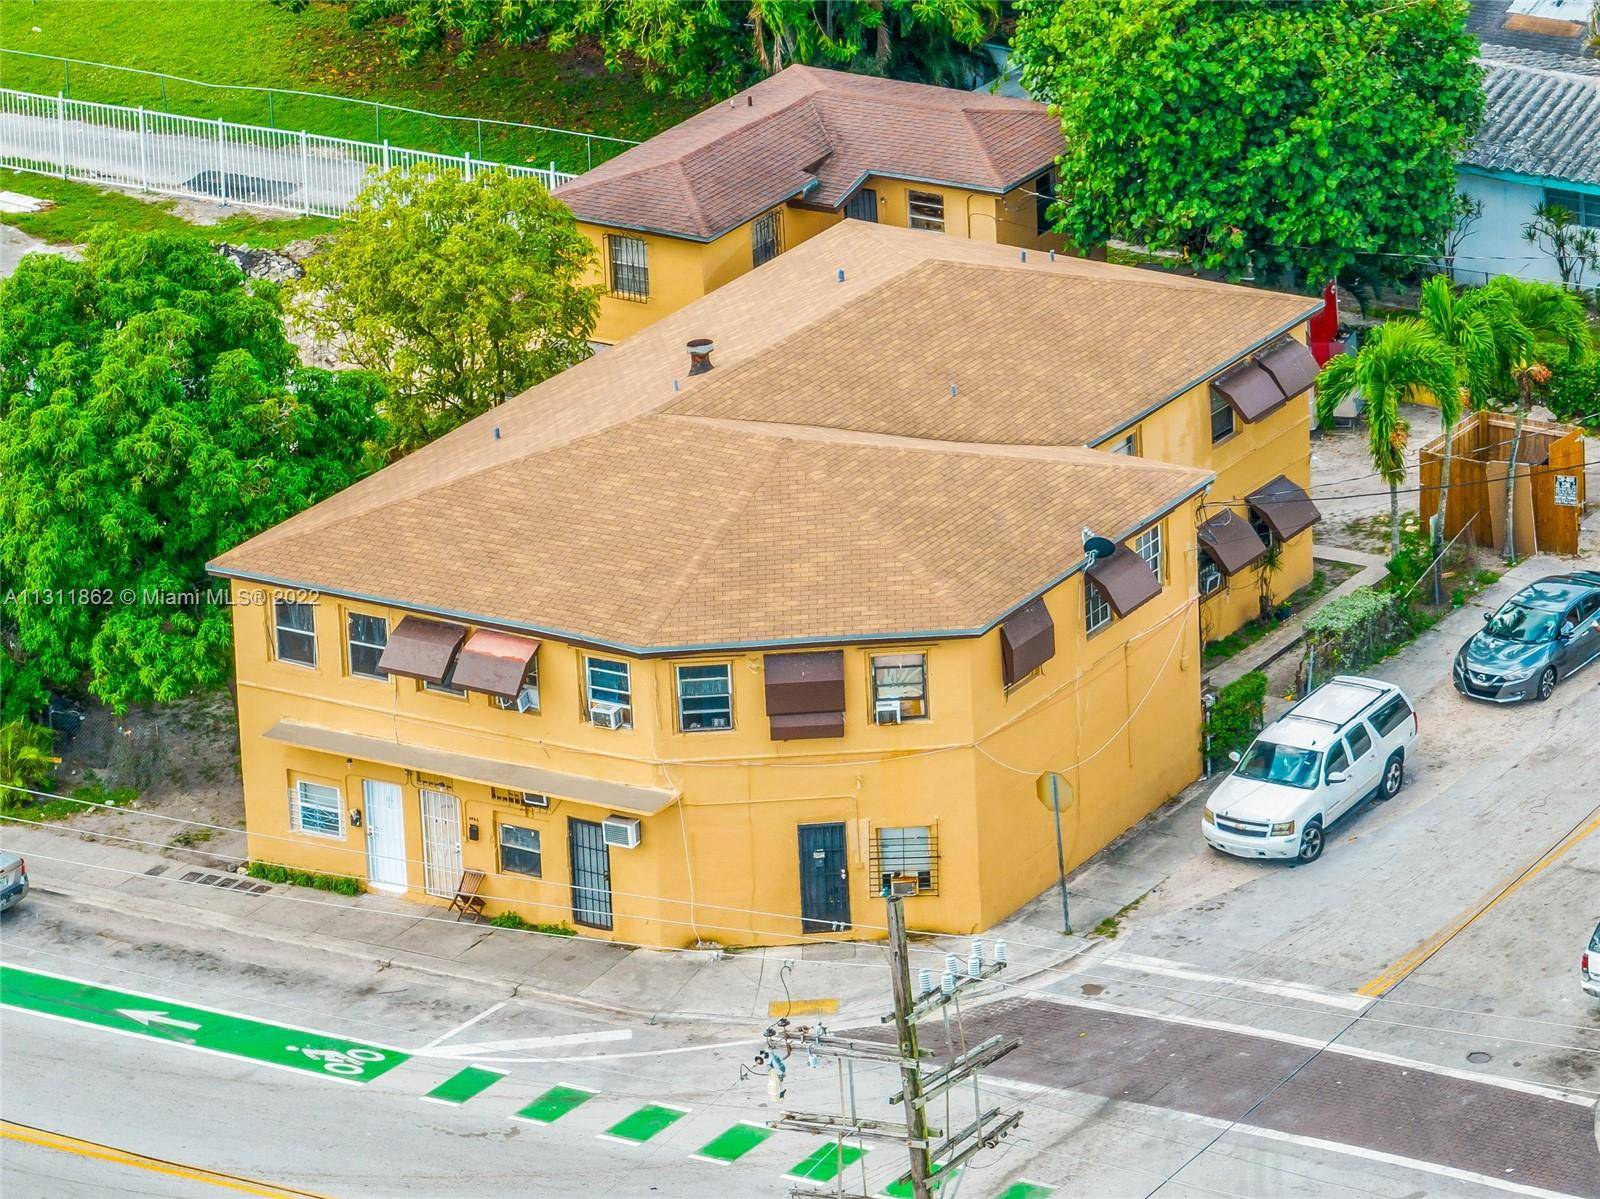 14 Unit Multifamily located in the heart of Miami, FL.